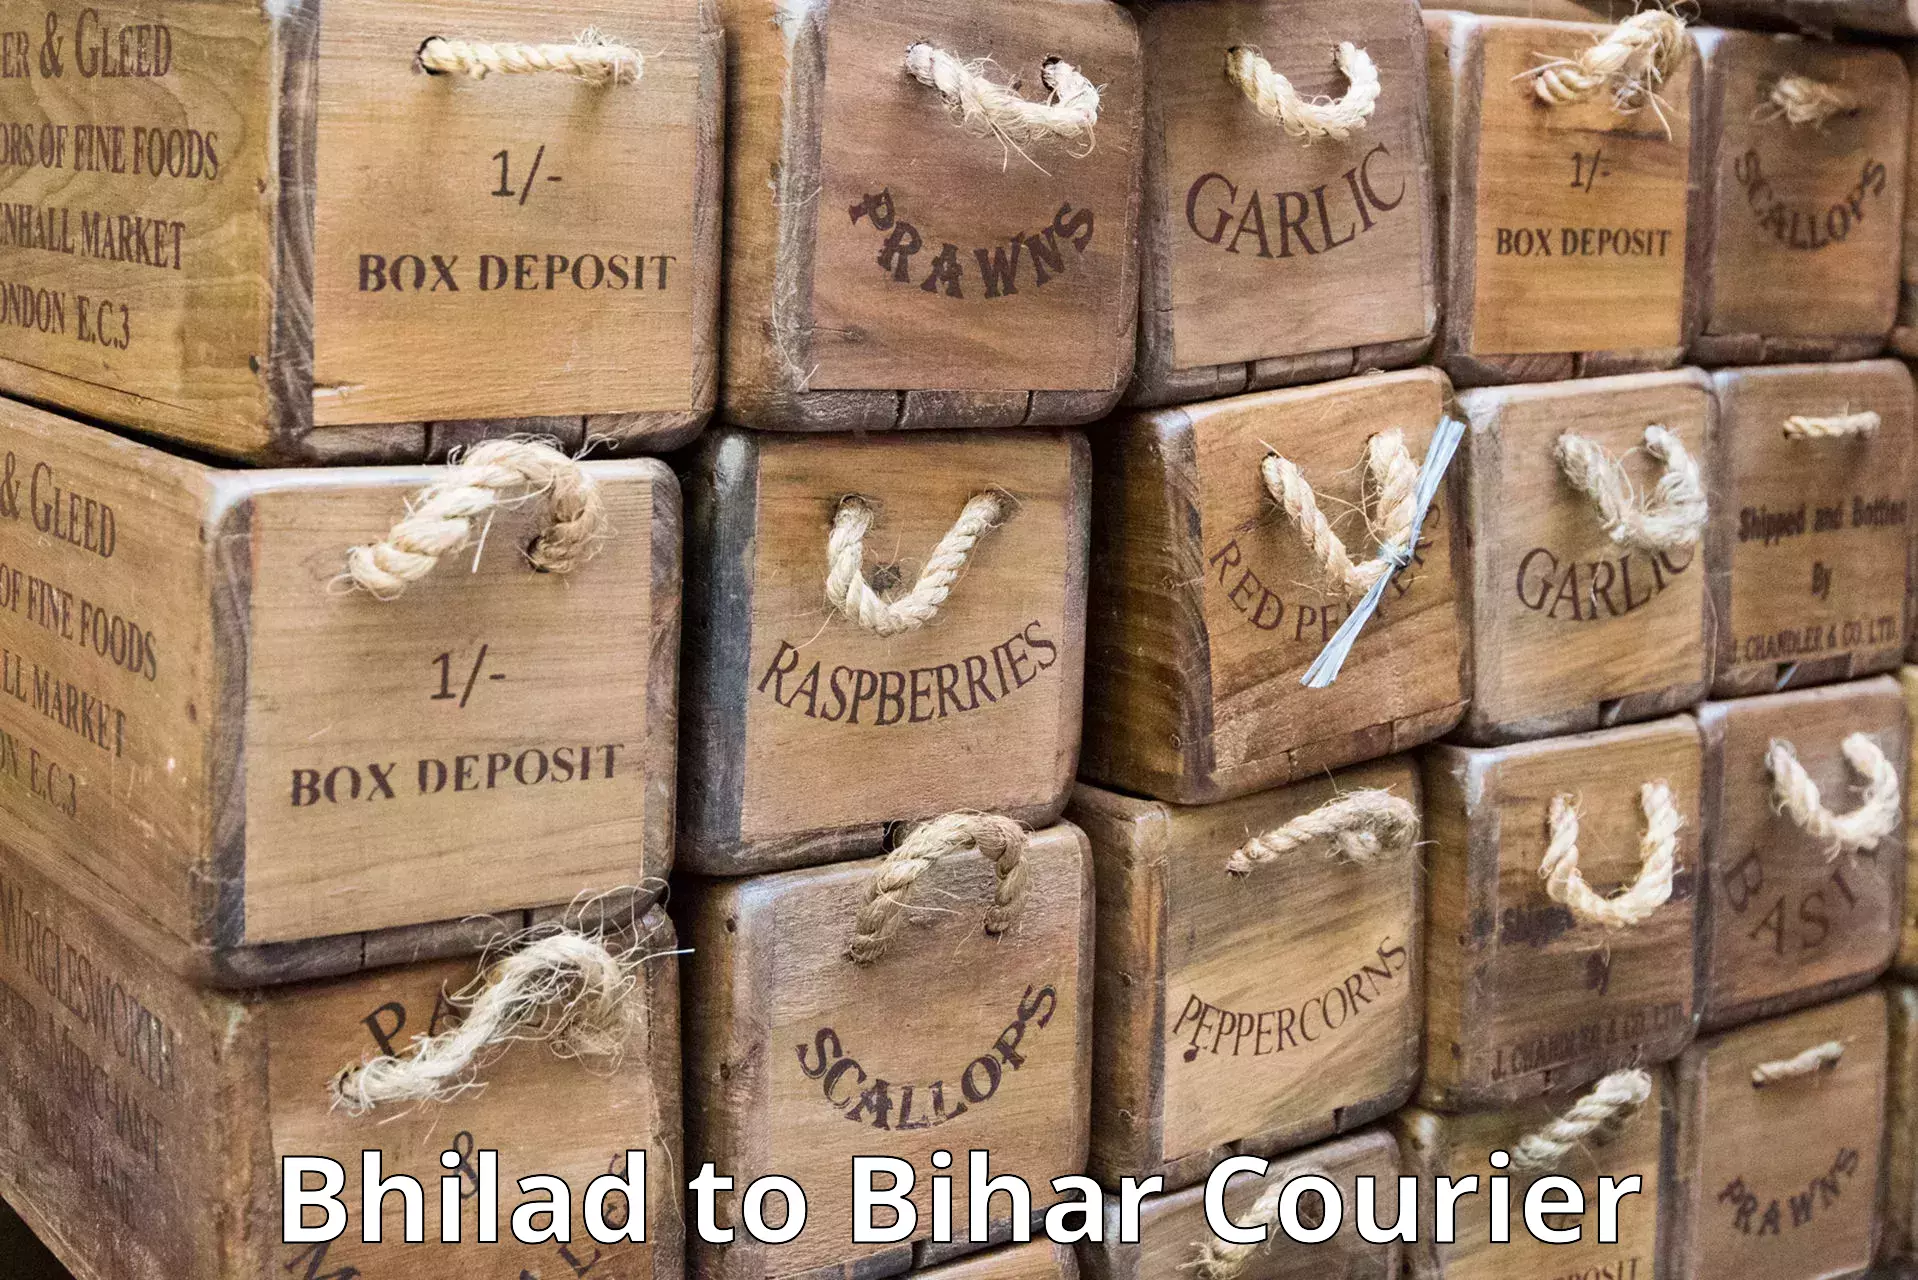 Cash on delivery service Bhilad to Darbhanga